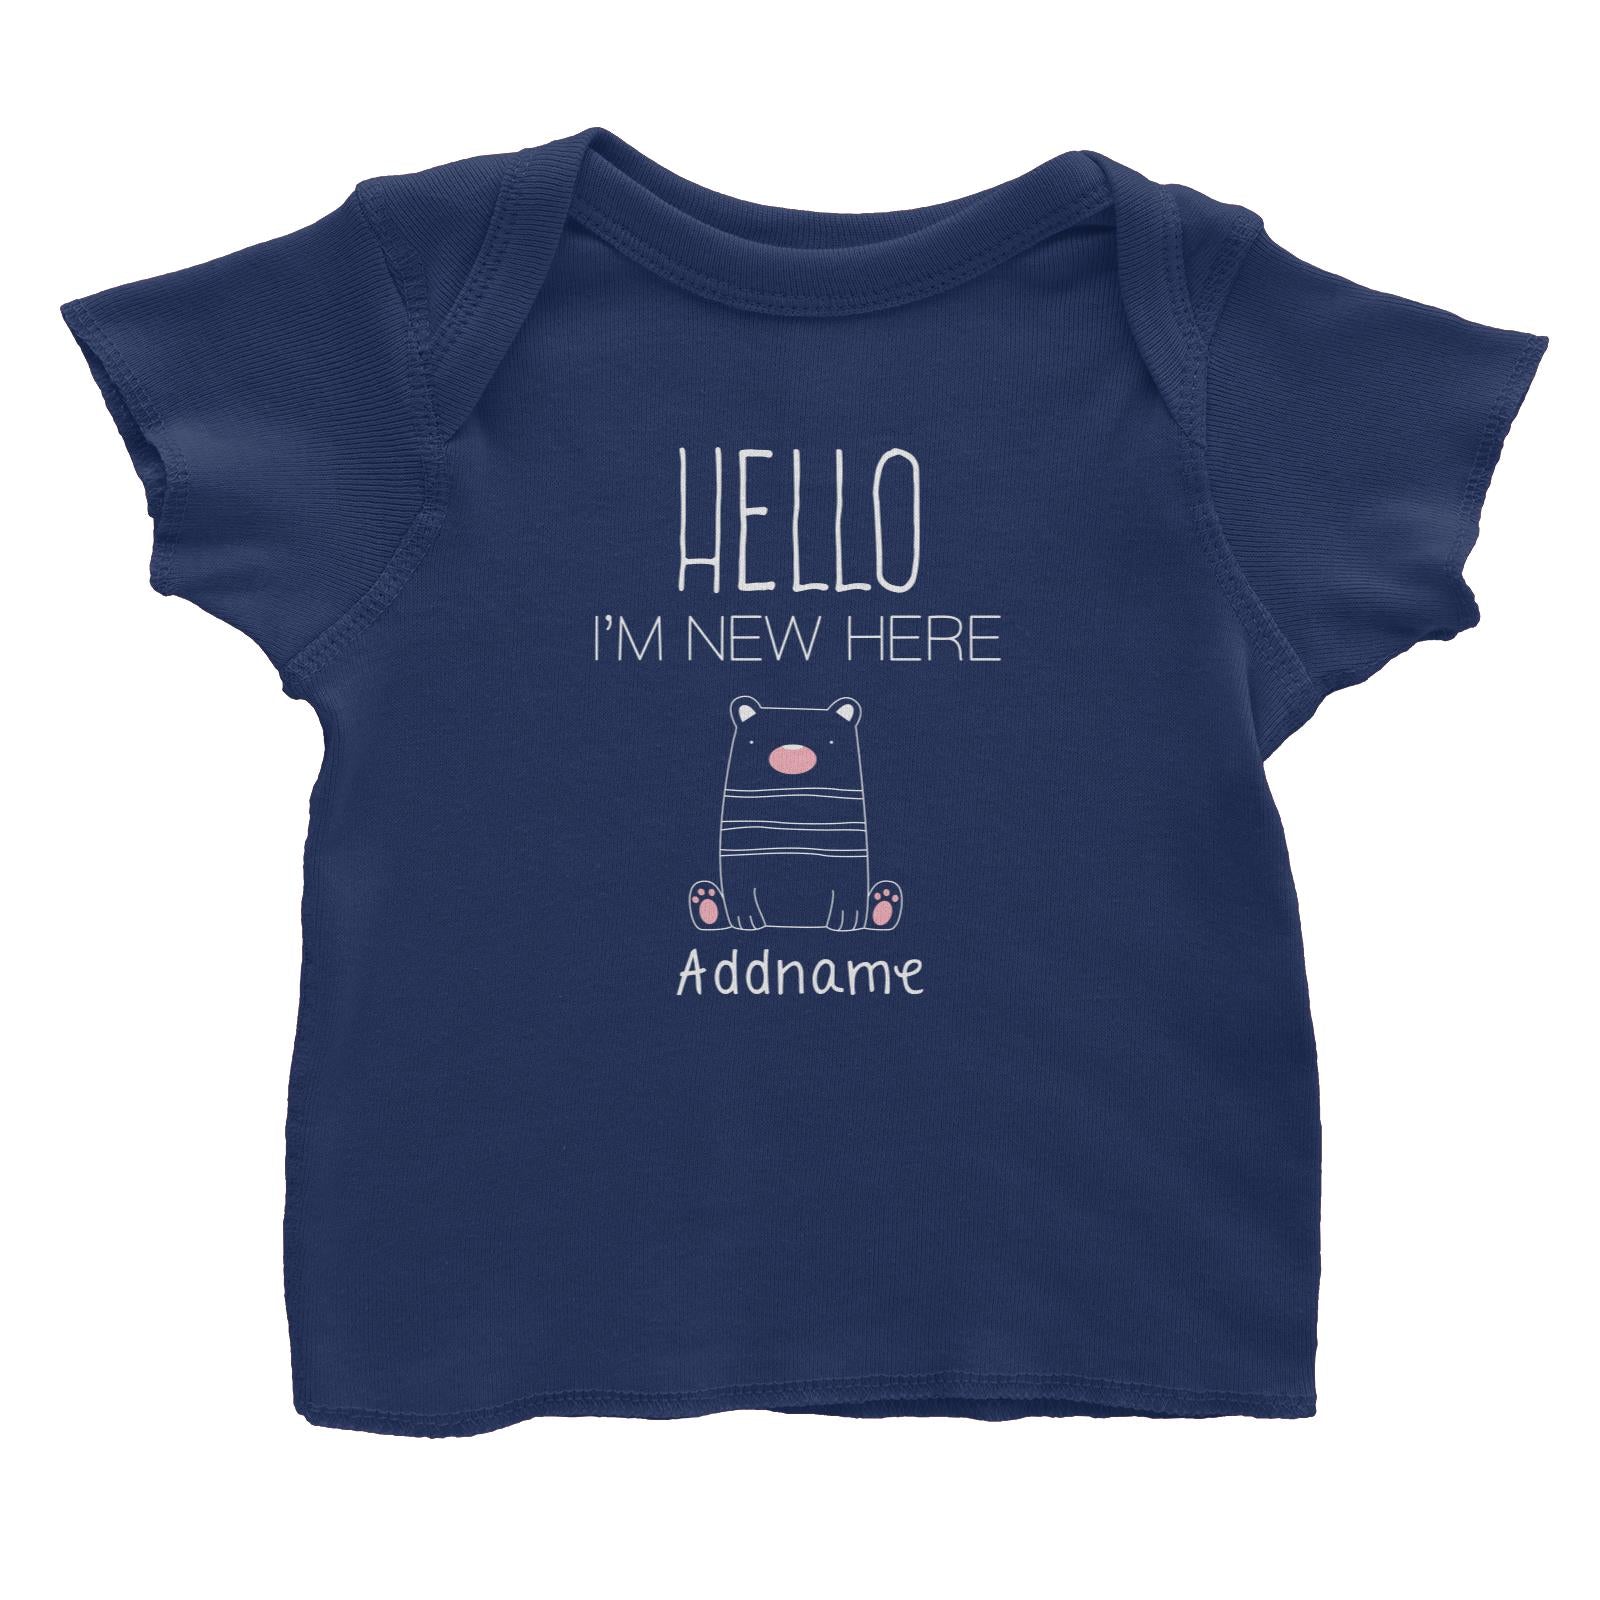 Cute Animals and Friends Series 2 Bear Hello I'm New Here Addname Baby T-Shirt